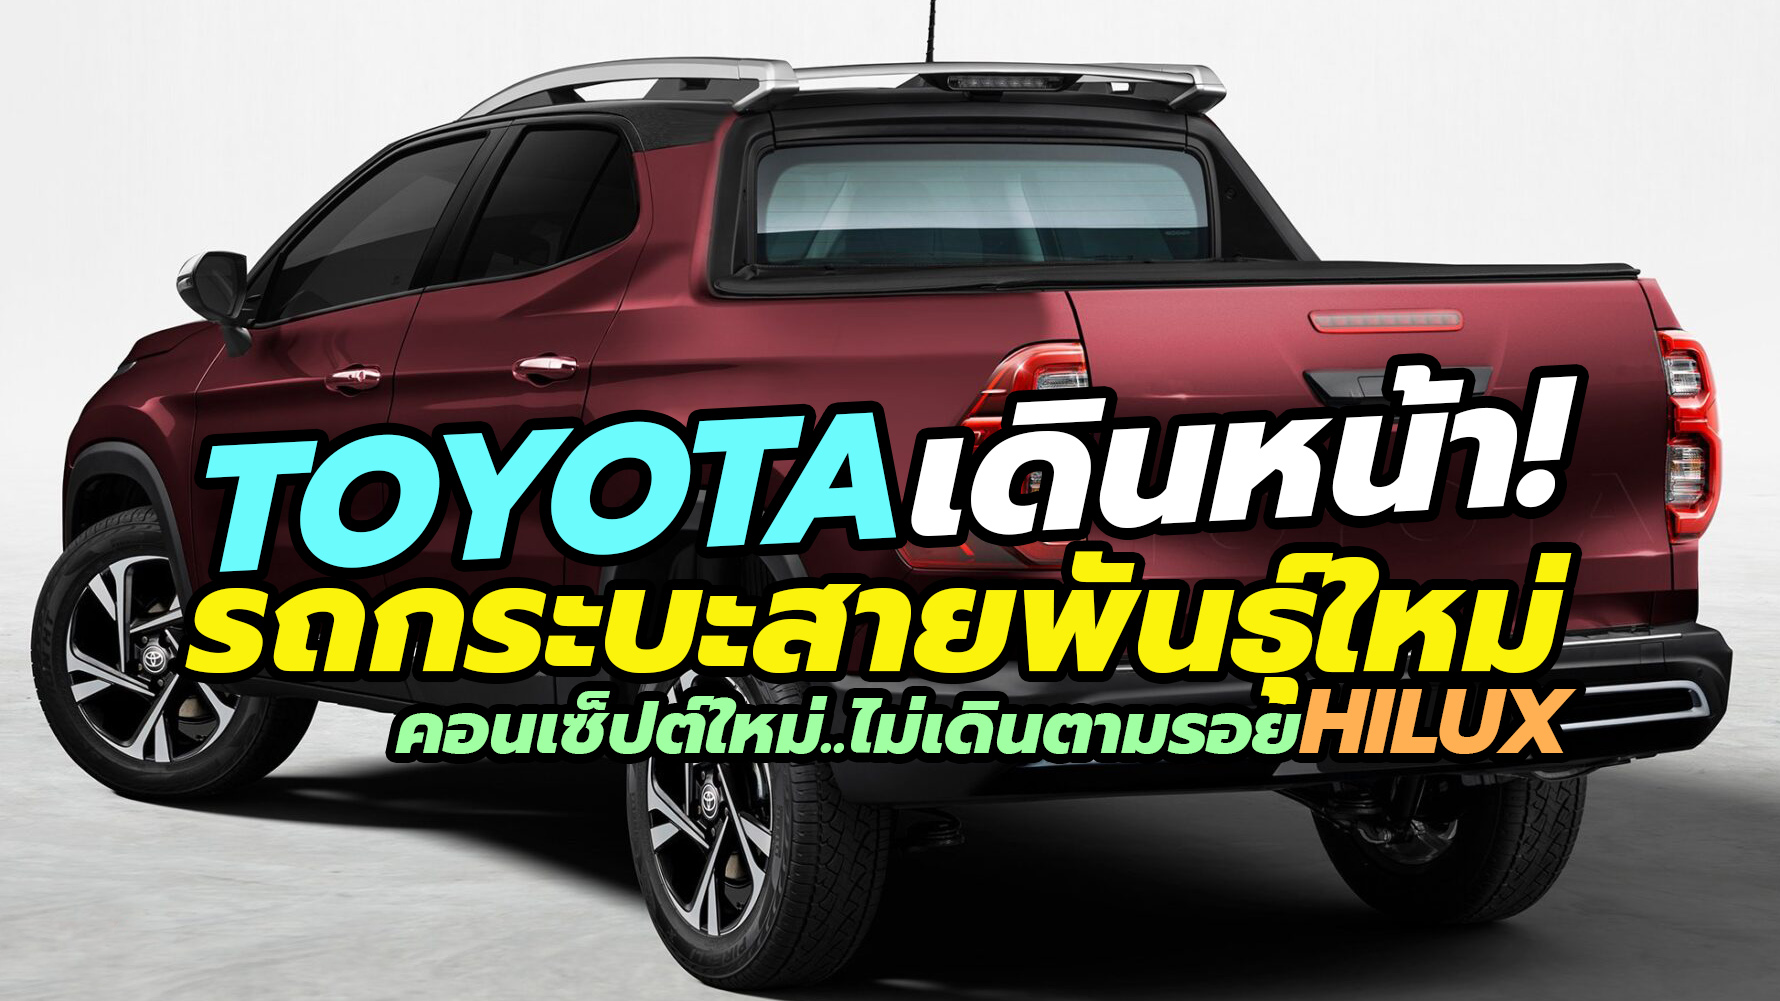 Toyota small Hilux